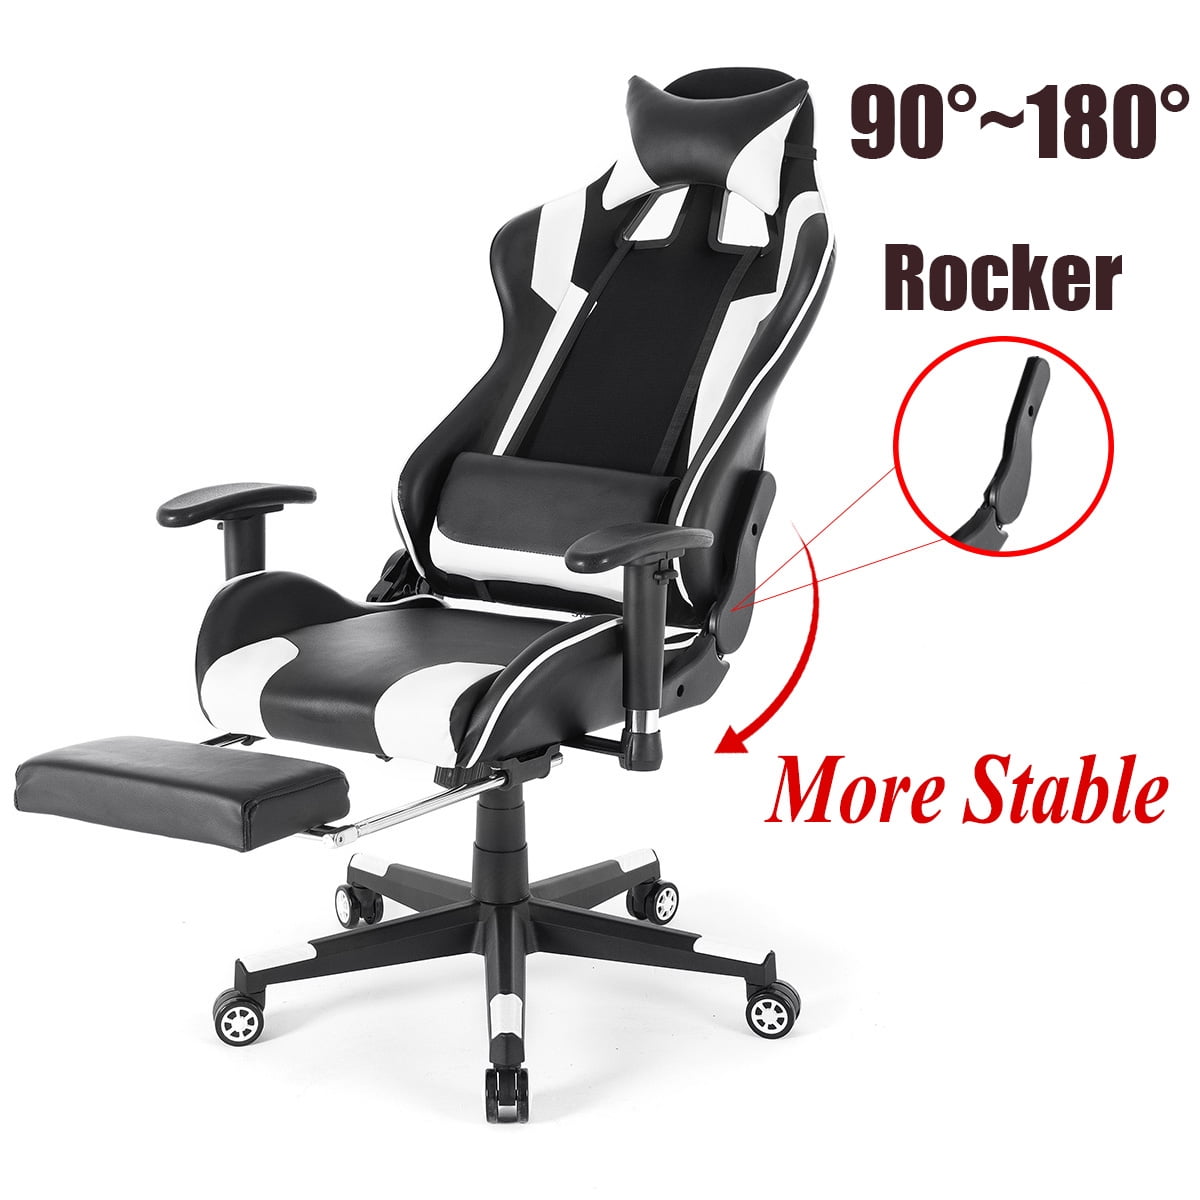 Details about   Gaming Chair Racing Style High-Back Office Swivel Chair 90-180 degree Reclining 